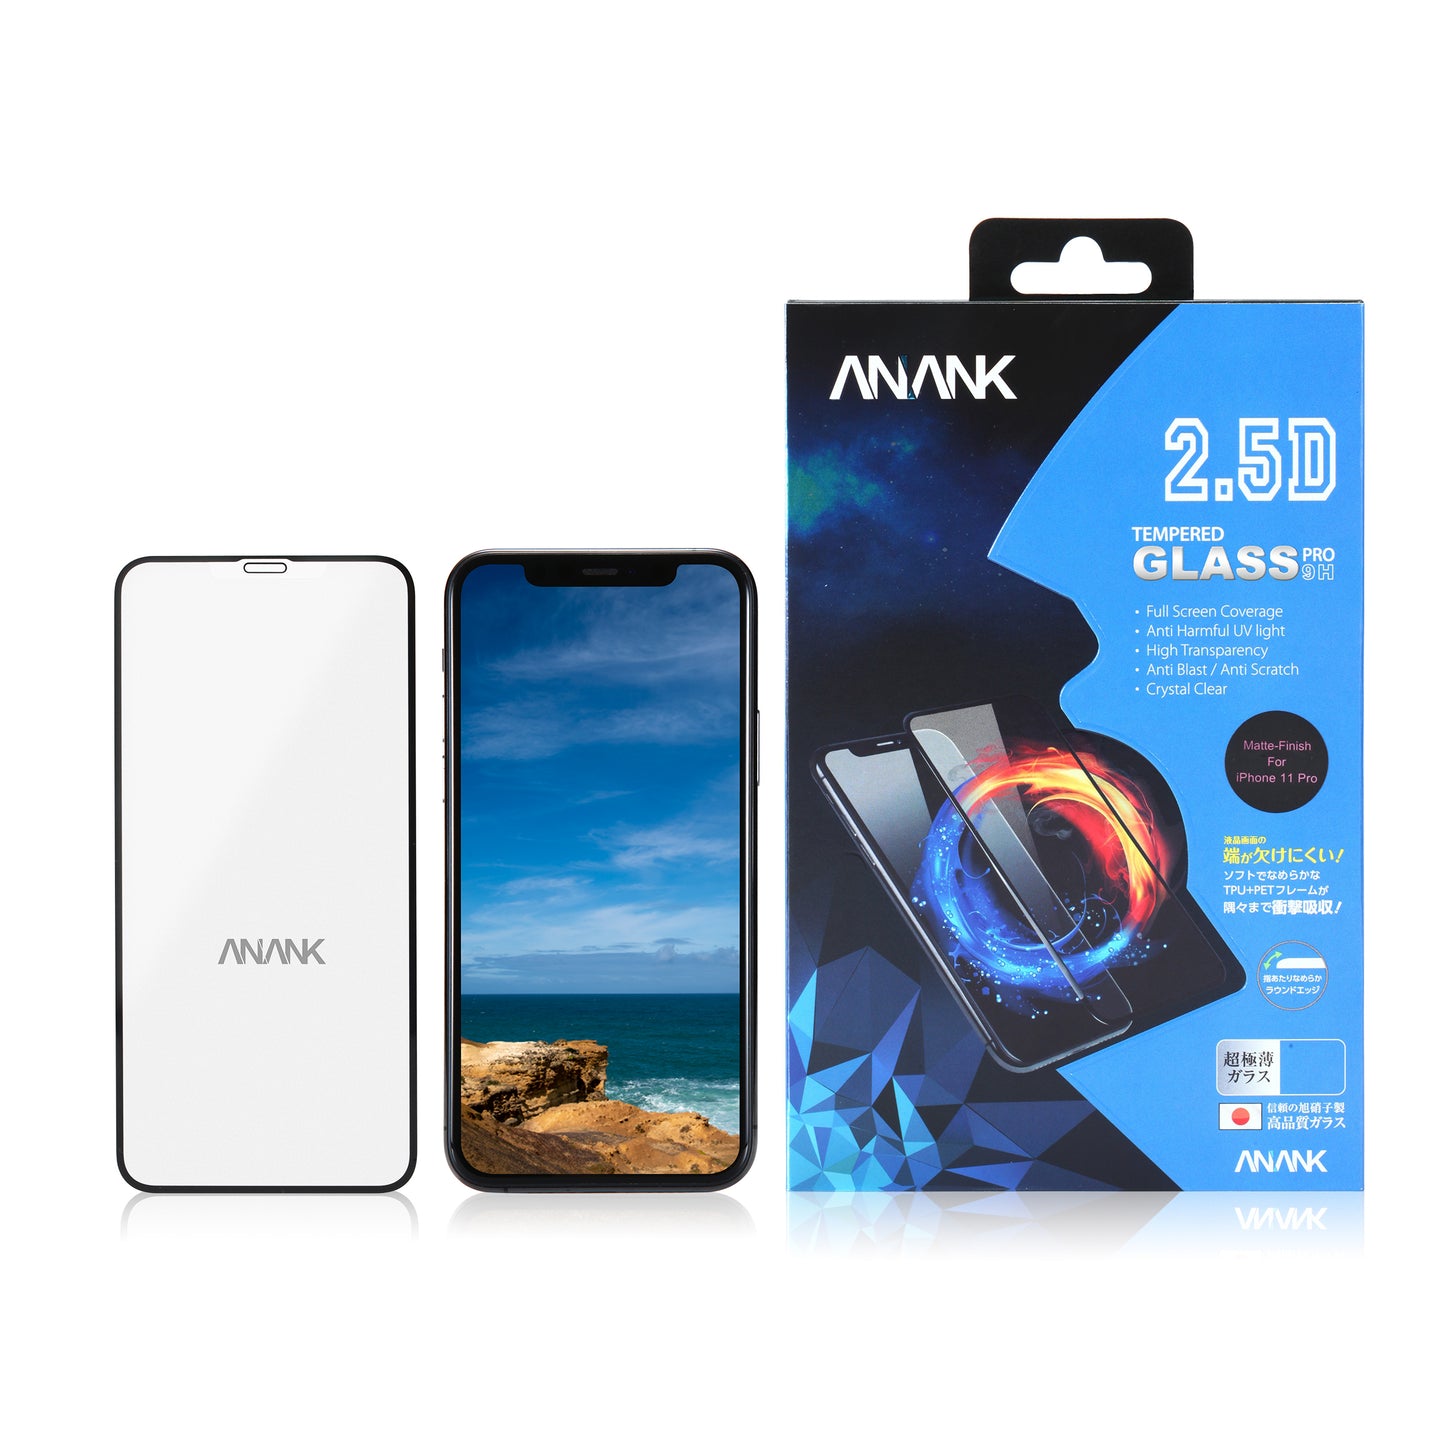 ANANK 9H Hardness Full Coverage Tempered Glass Screen Protector Film for Apple iPhone